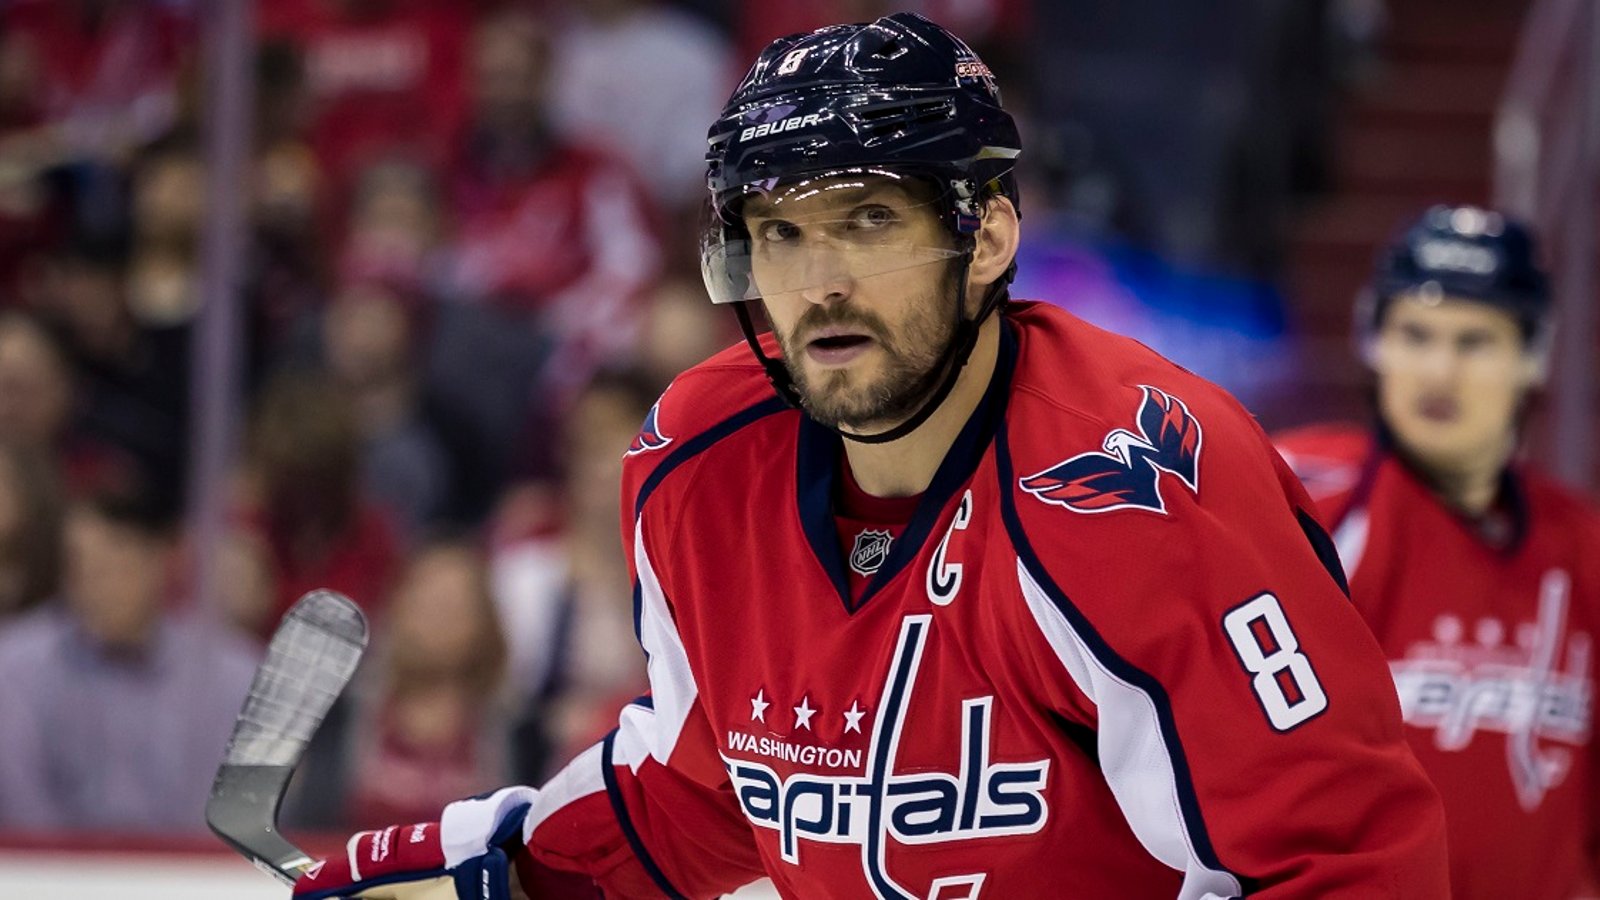 Breaking: Ovechkin accused of being a man with “too much weight and no brain.”